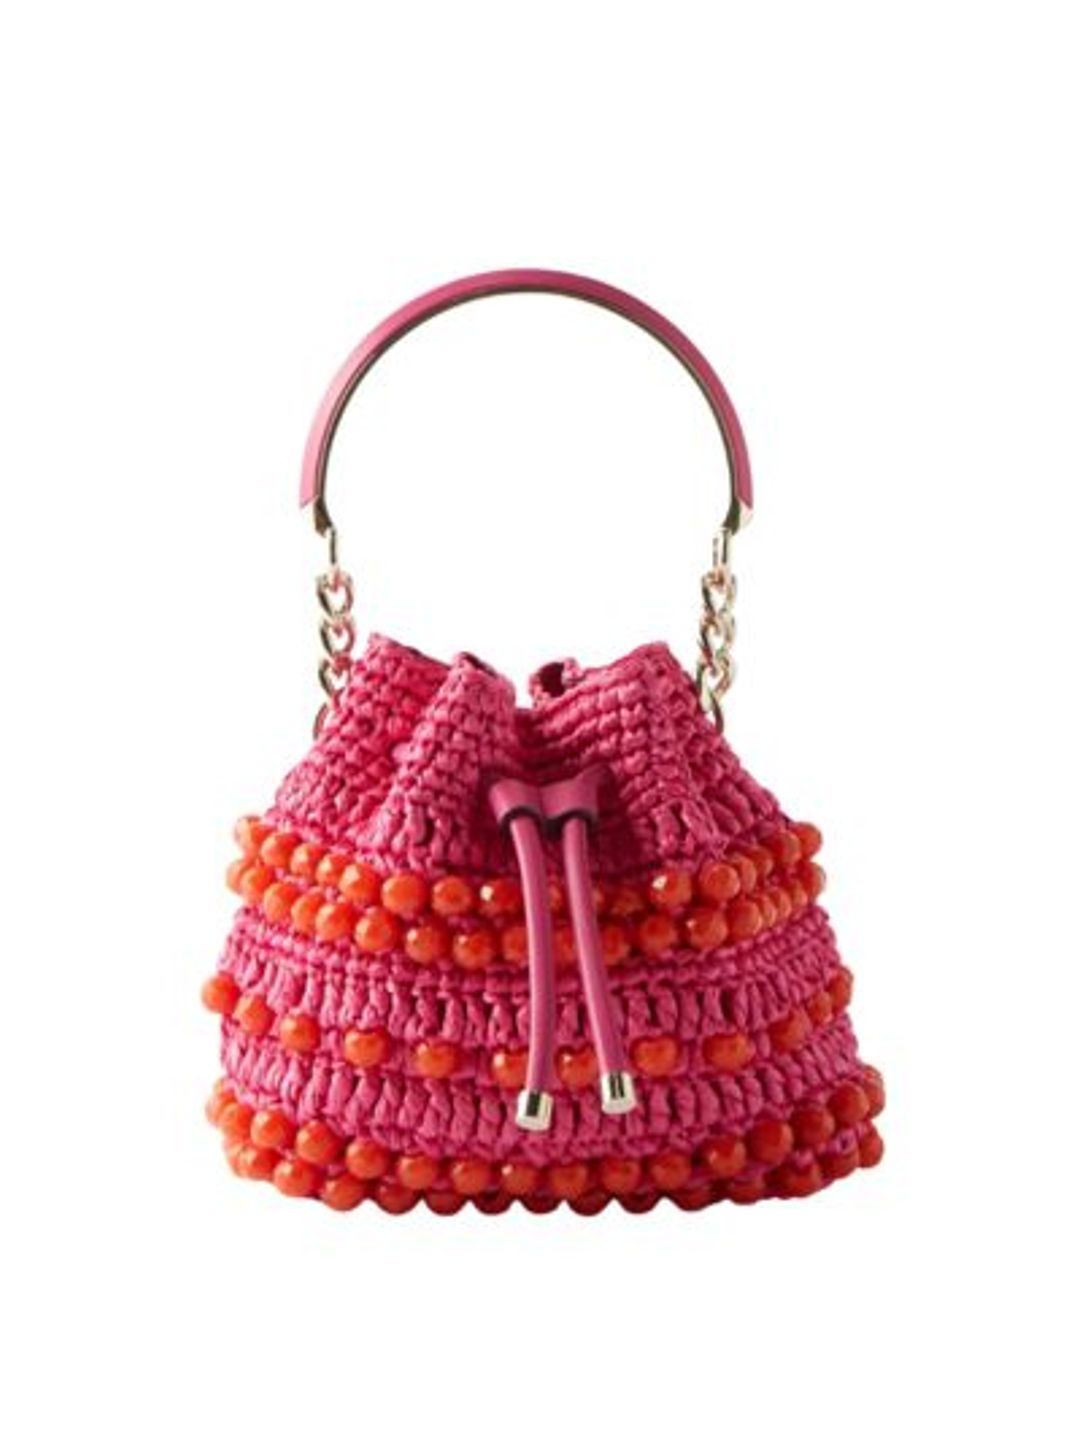 Crochet bags: the 10 best styles to shop right now | HELLO!